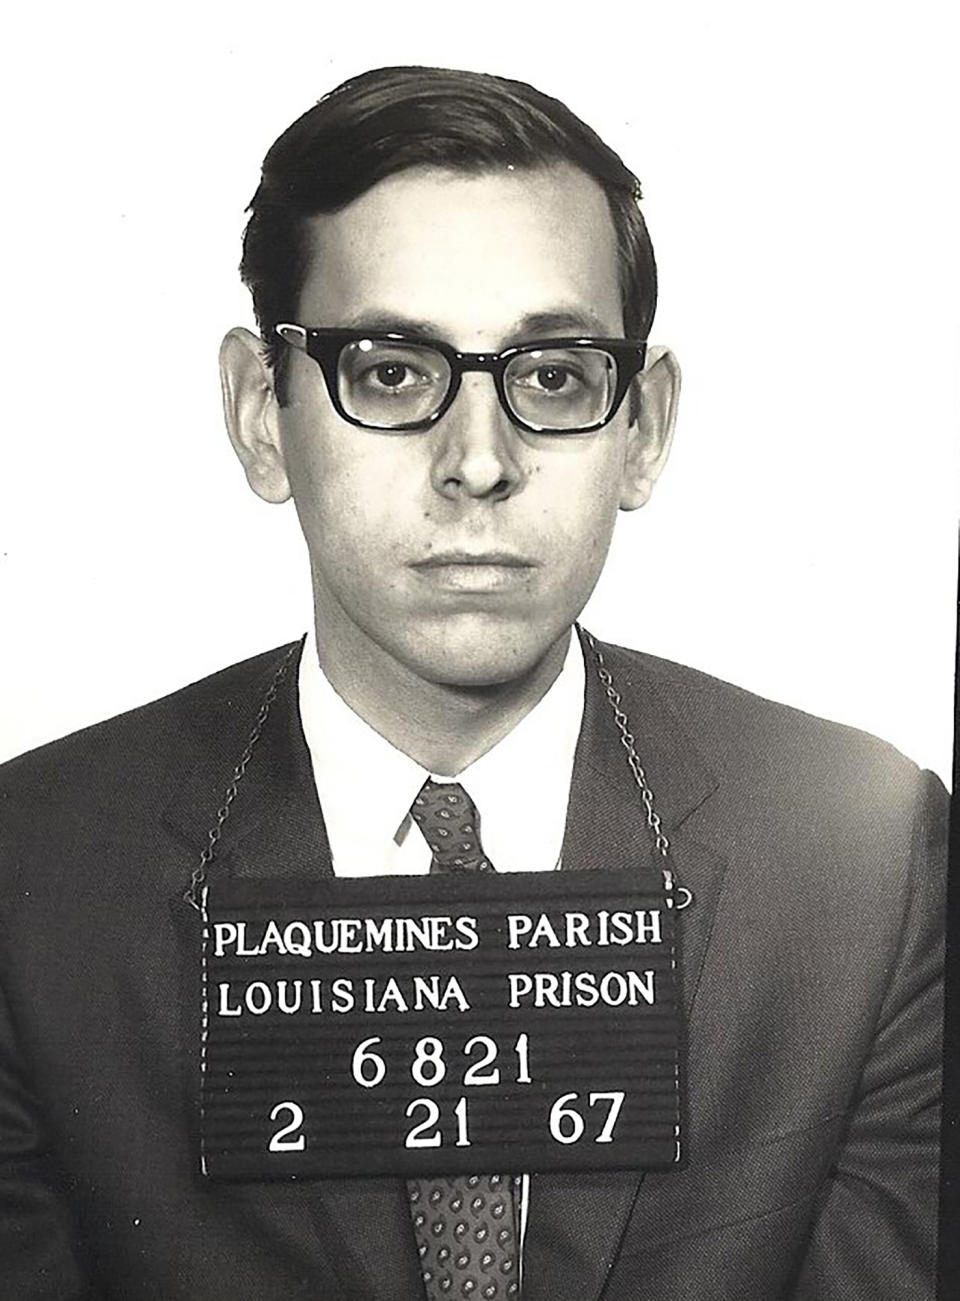 This Feb. 21, 1967 booking photo from the Plaquemines Parish Louisiana Prison shows Richard Sobol. Sobol was jailed for representing Gary Duncan, the subject of a case that led to a U.S. Supreme Court decision guaranteeing the right to a trial by jury in state criminal cases. Sobol, a lawyer who defended black civil rights activists at the height of the movement in Louisiana, often weathering threats to his own life, died March 24, 2020, at his home in Sebastopol, Calif., of aspiration pneumonia. He was 82. (Plaquemines Parish Louisiana Prison via AP)